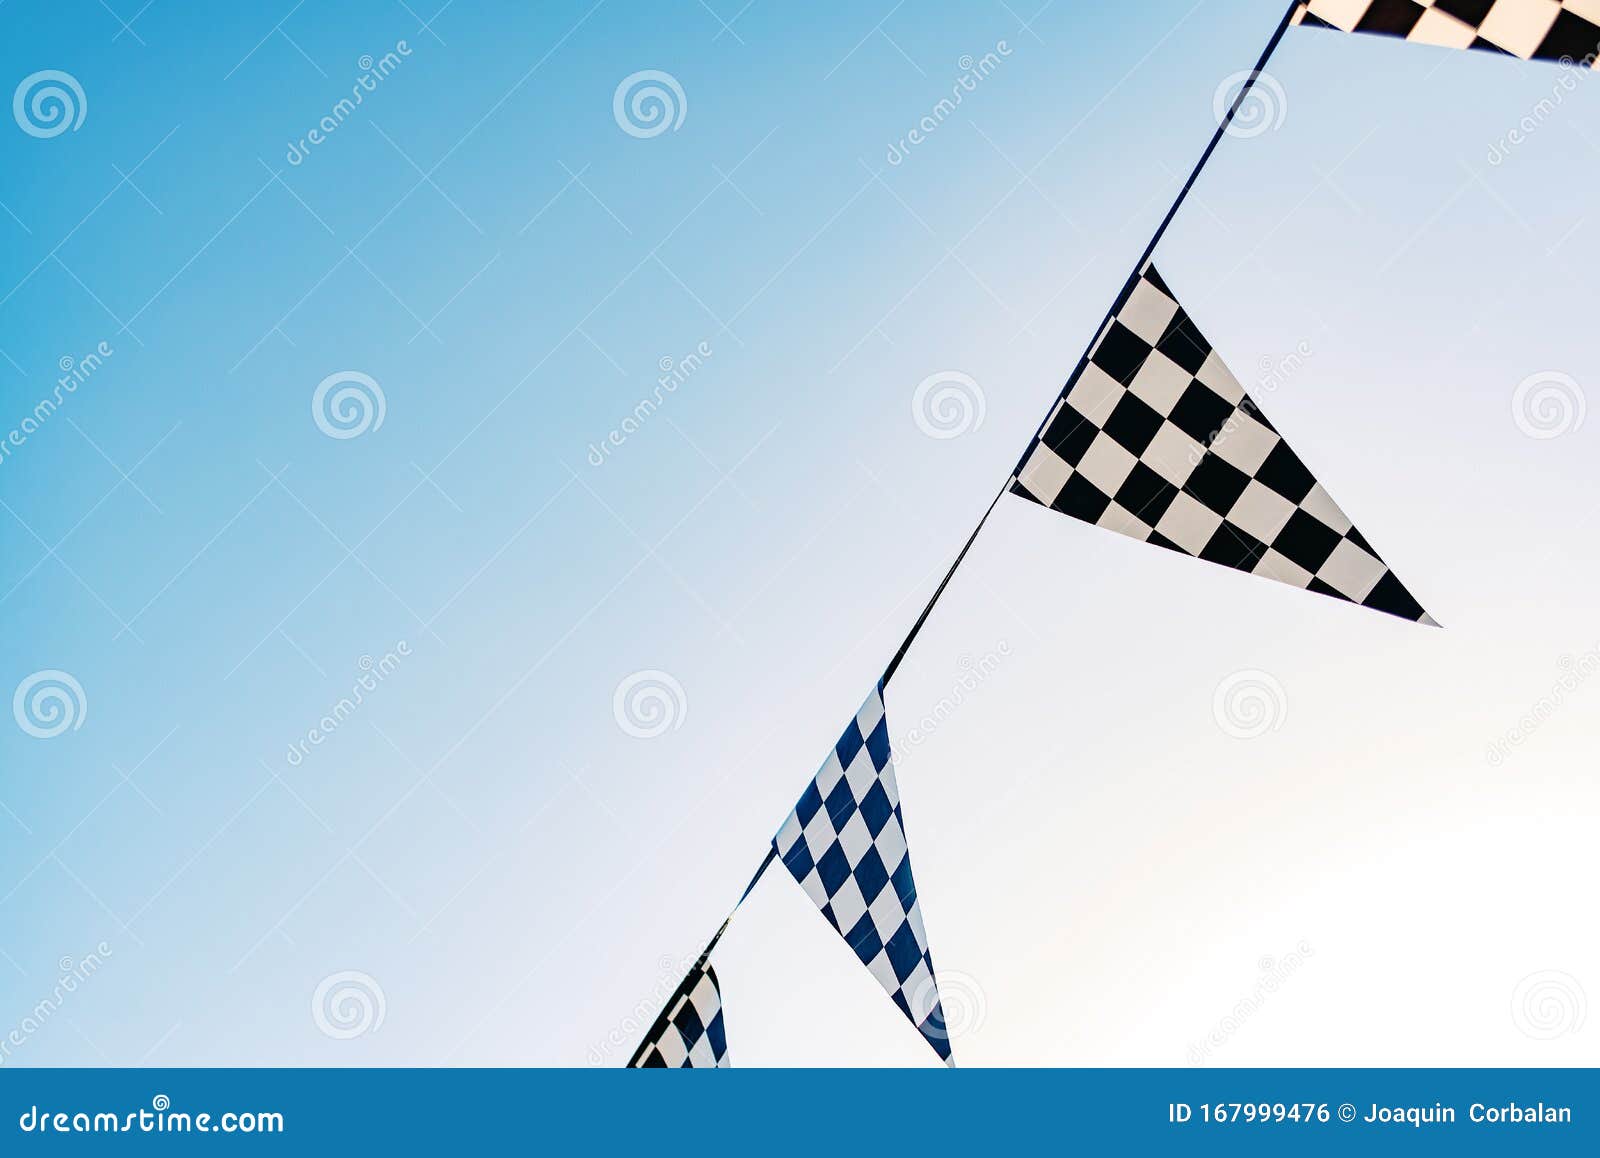 53 Best Photos Checkered Flag Decorations - Racing checkered flag birthday decorations in 2020 | Race ...